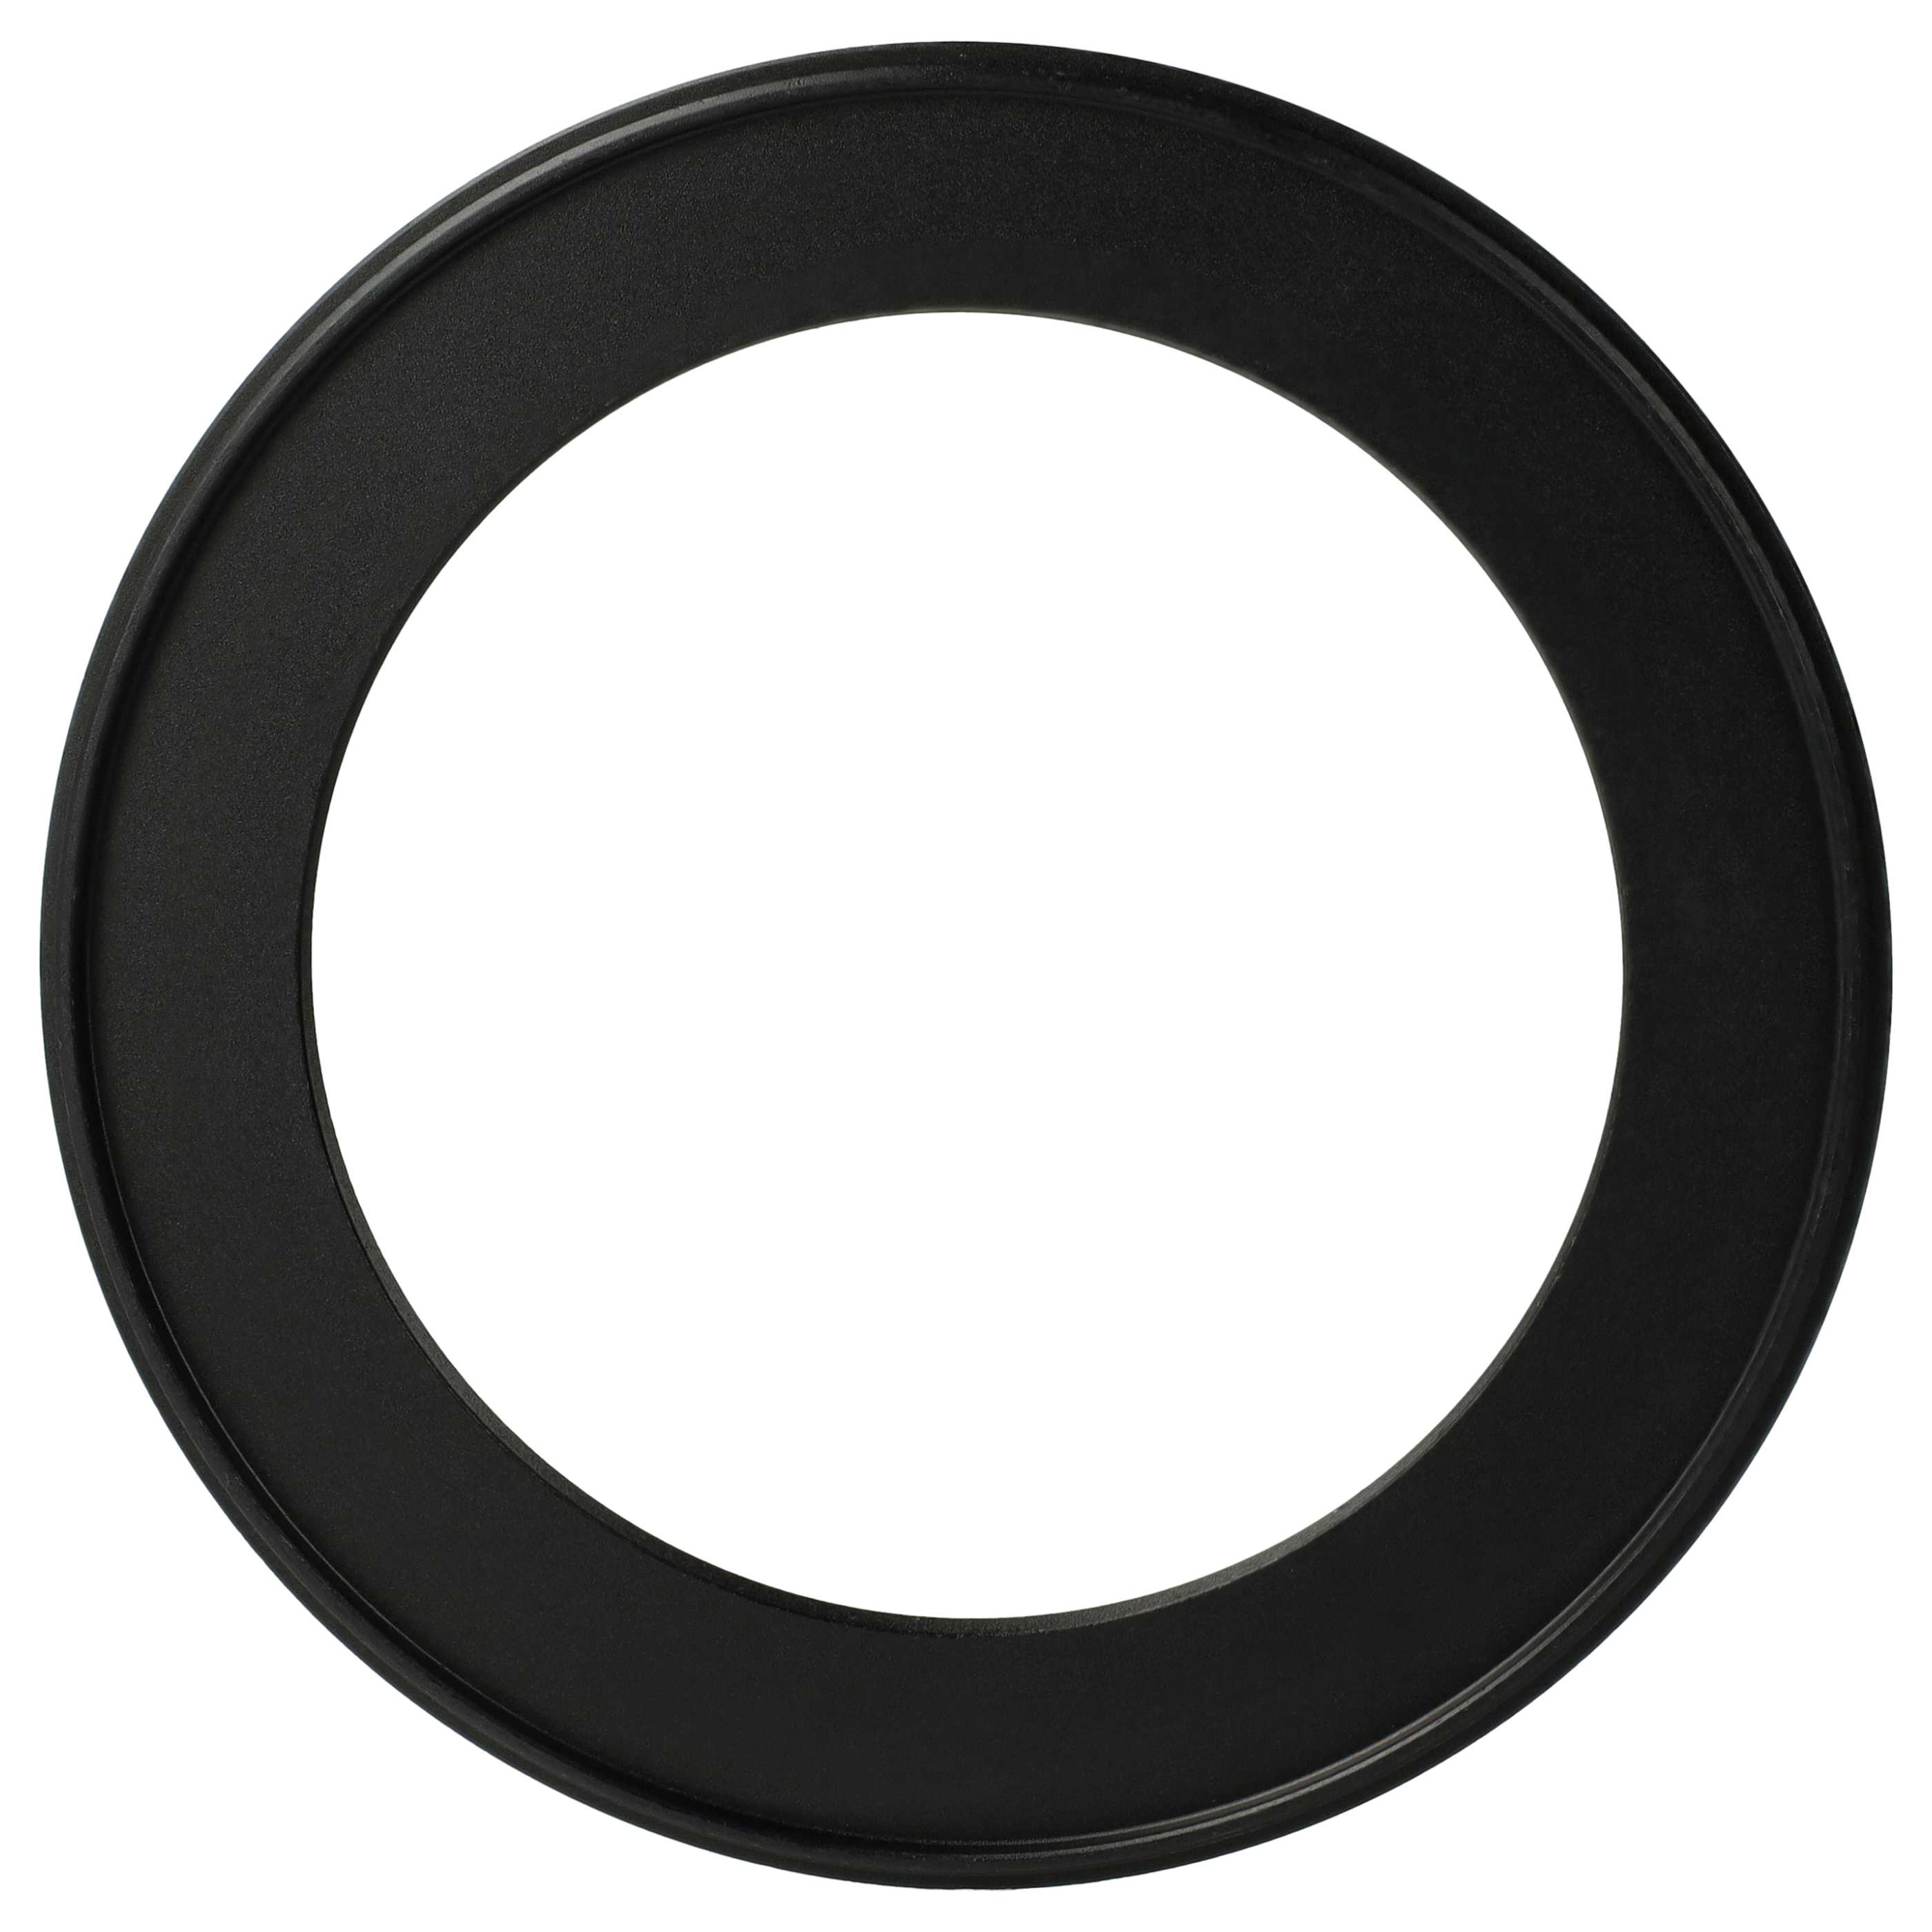 Step-Down Ring Adapter from 105 mm to 77 mm suitable for Camera Lens - Filter Adapter, metal